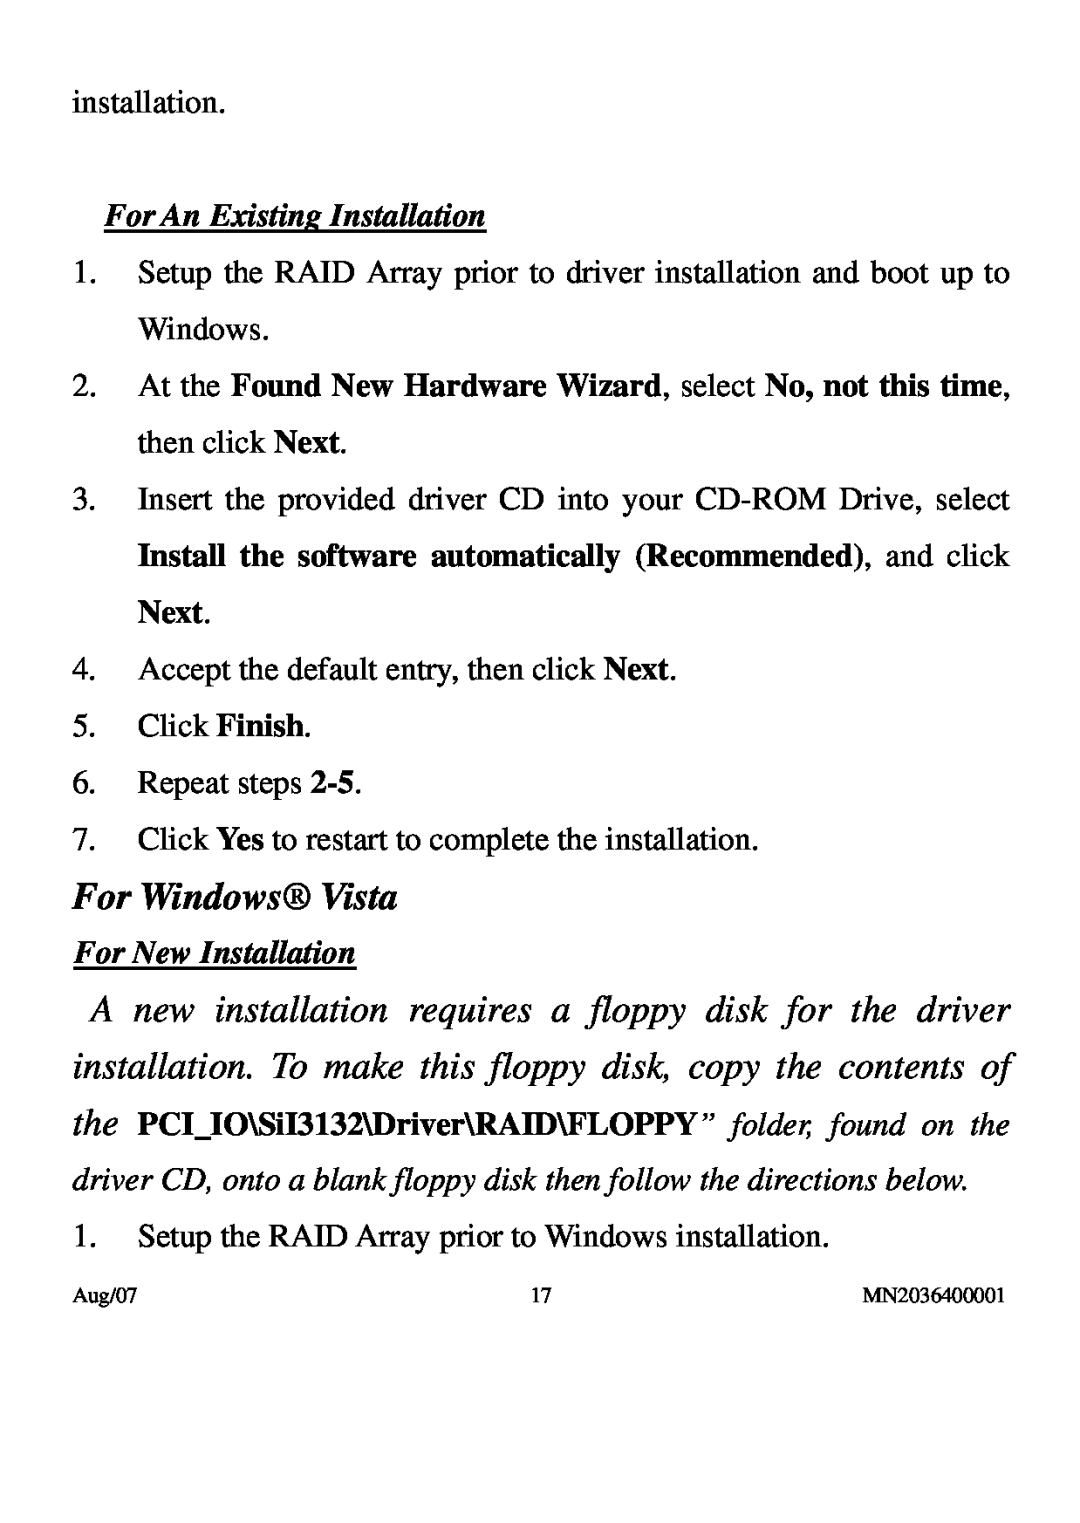 PNY P-DSA2-PCIE-RF user manual For Windows Vista, For An Existing Installation, For New Installation 